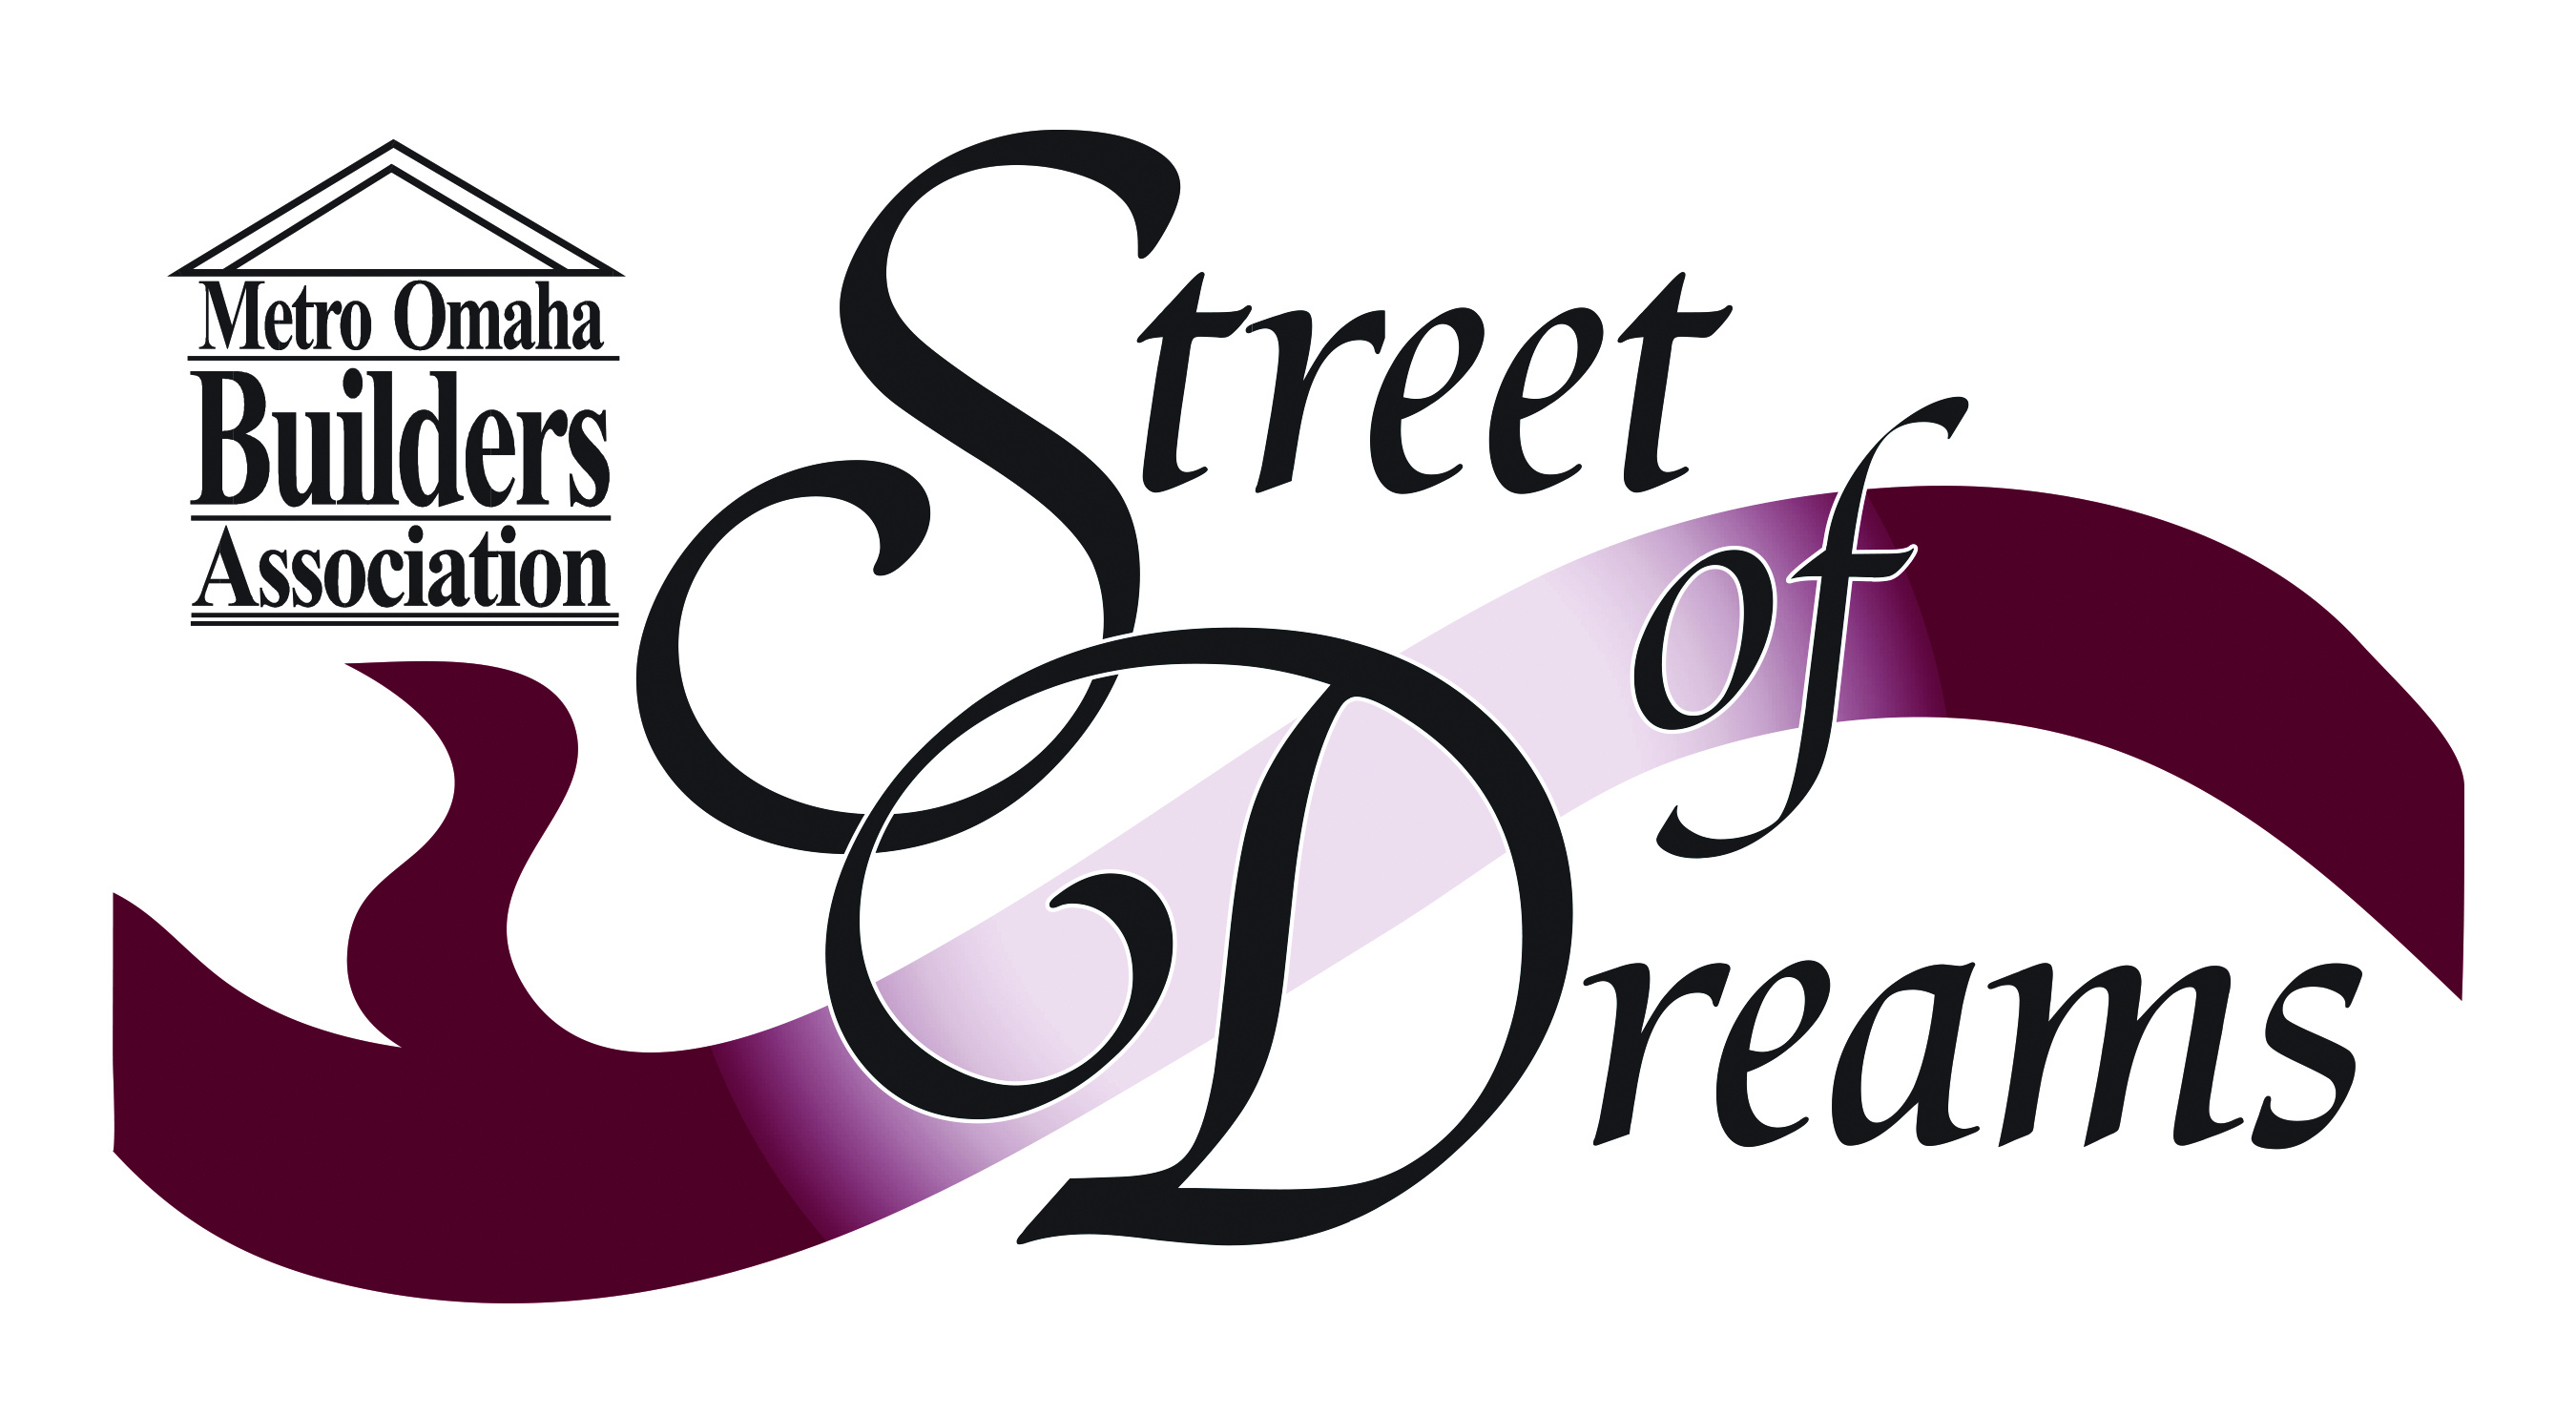 Going to the 2019 Street of Dreams in Omaha? Here’s What You Need to